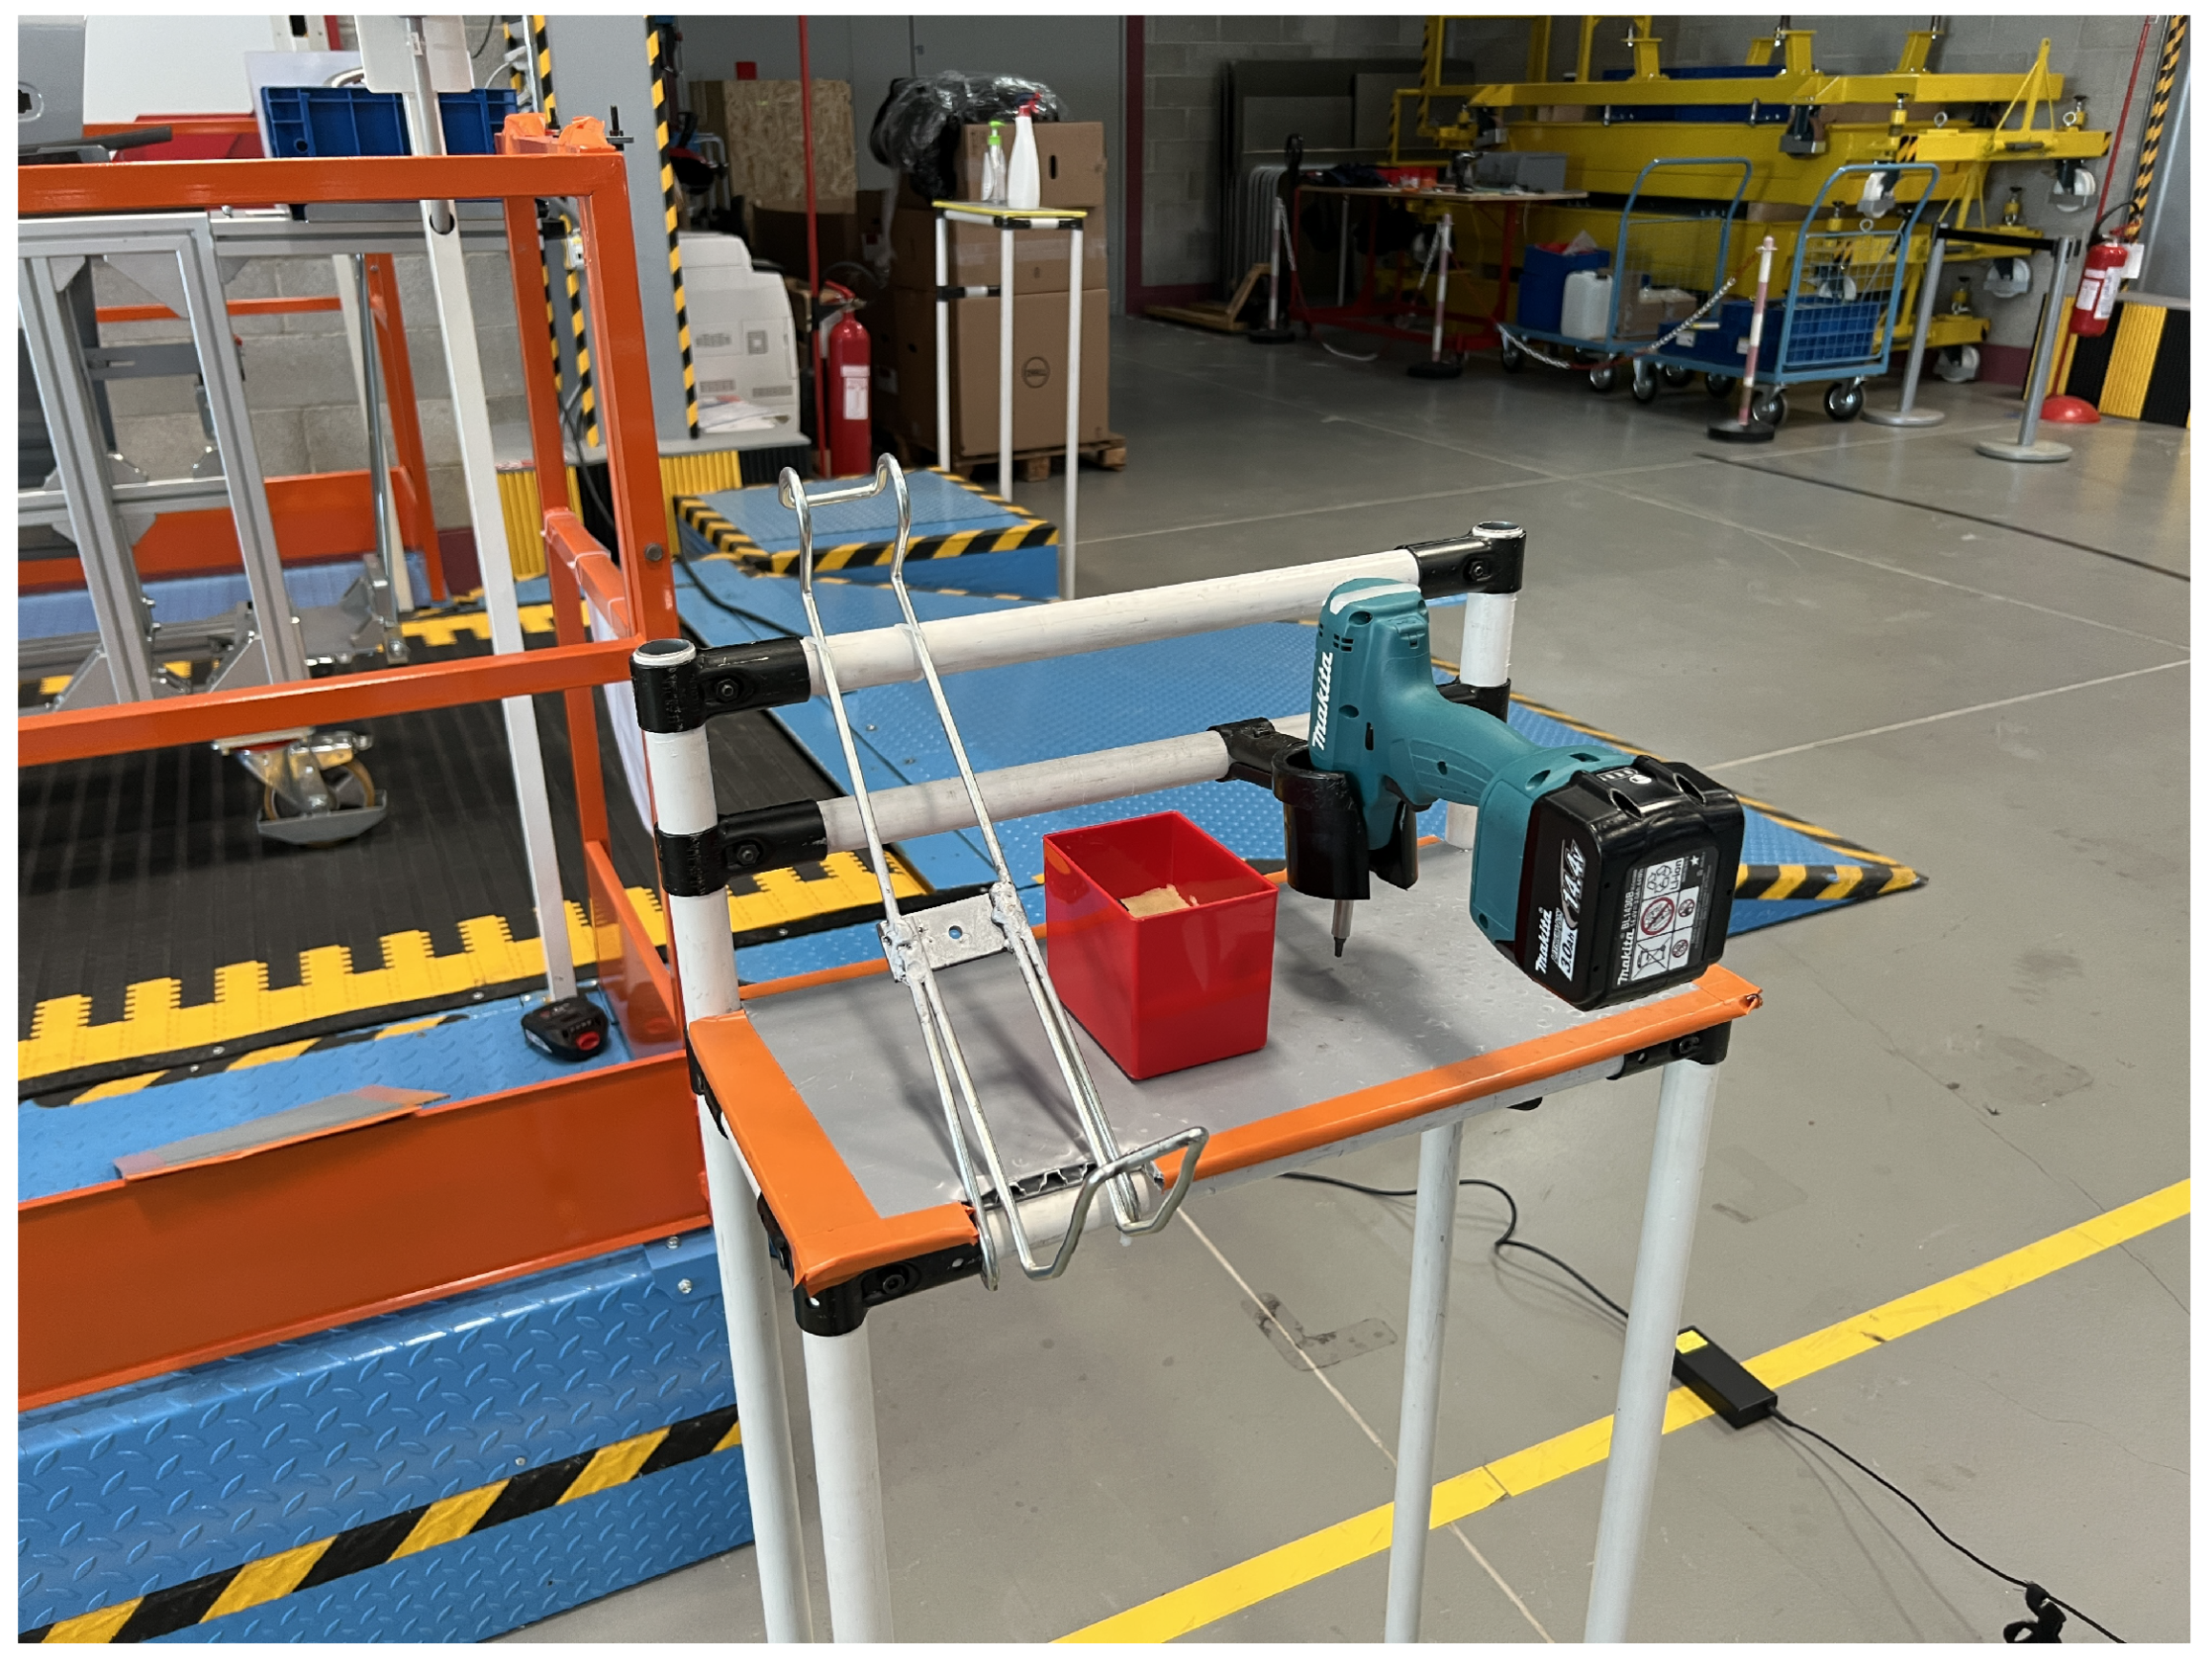 J. Imaging | Free Full-Text | 6D Object Localization in Car-Assembly  Industrial Environment